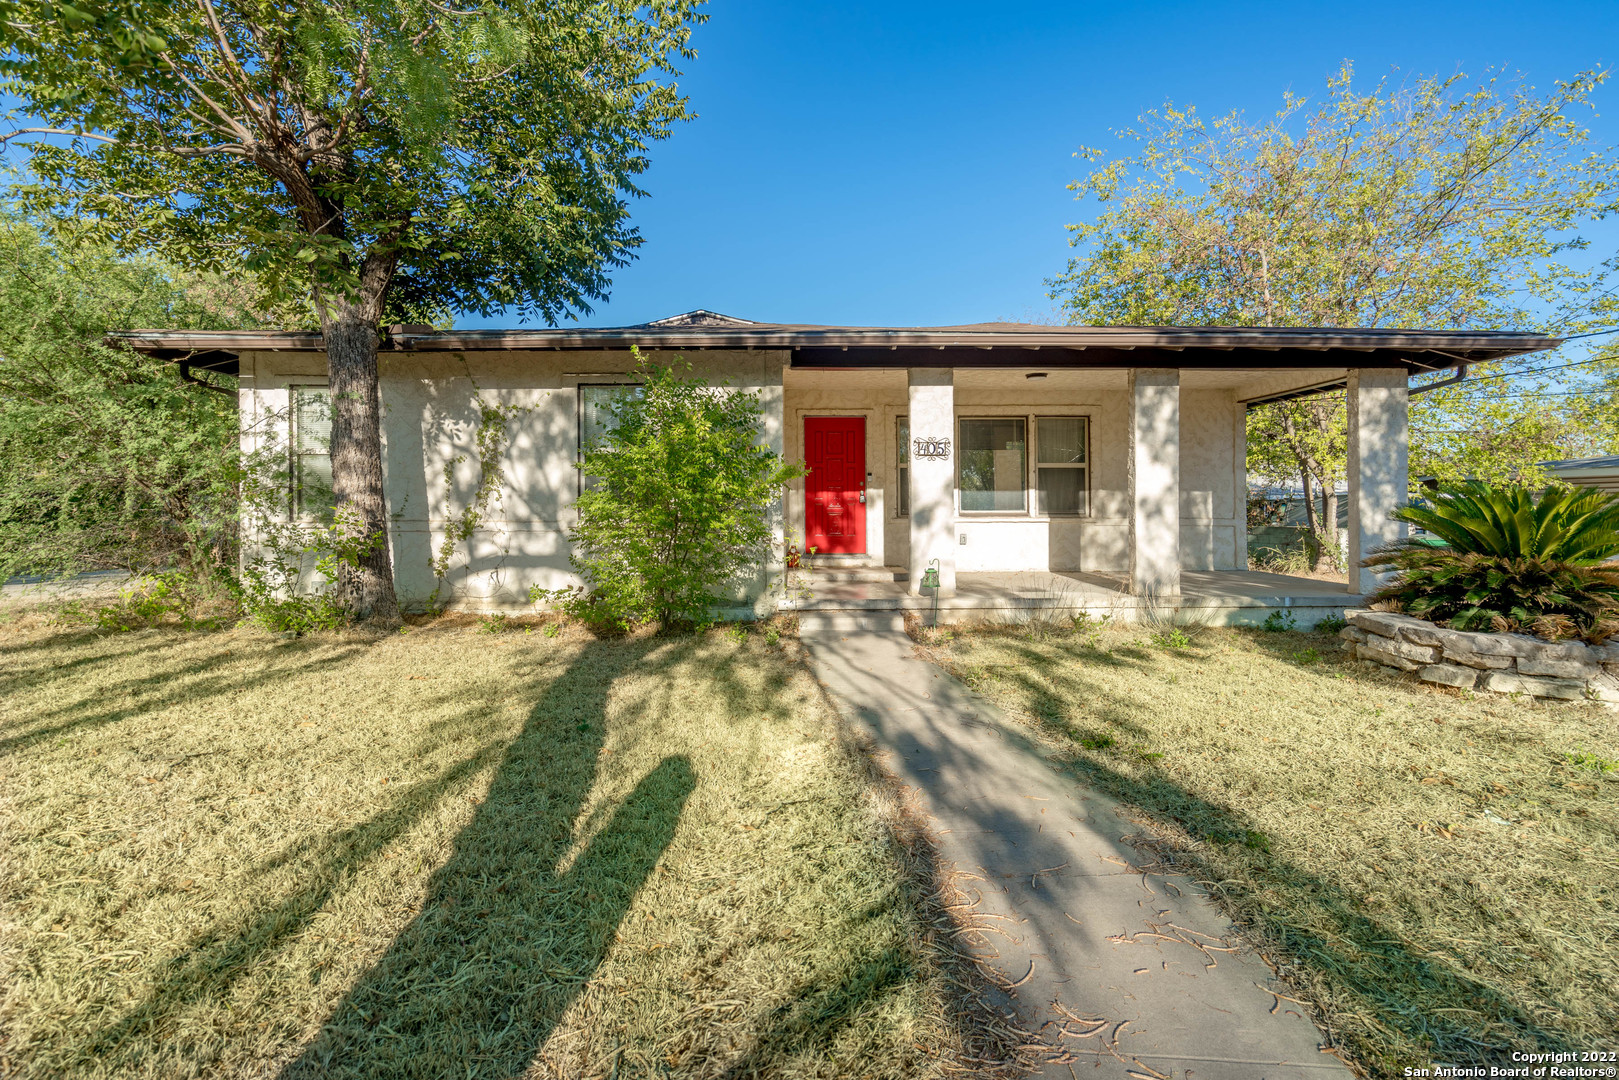 More than 1/2 an ACRE in central San Antonio, at Donaldson Terrace! Bright, roomy and sweet 1 story home renovated in last few years. Multiple living spaces inside and outside; perfect for large picnics or quite time in the city. Home features 3 bdrms/2 bths,  CERAMIC TILE/VINYL FLOORING throughout, APPLIANCES included in kitchen w/GRANITE COUNTERTOPS, NEW Fixtures, REDESIGNED BATH w/walk in shower, NEW garage door, NEW PLUMBING/ELECTRICAL throughout entire home, LIFETIME FOUNDATION WARRANTY, FRESH LANDSCAPING, and more!  Check room measurements as they are not accurate.